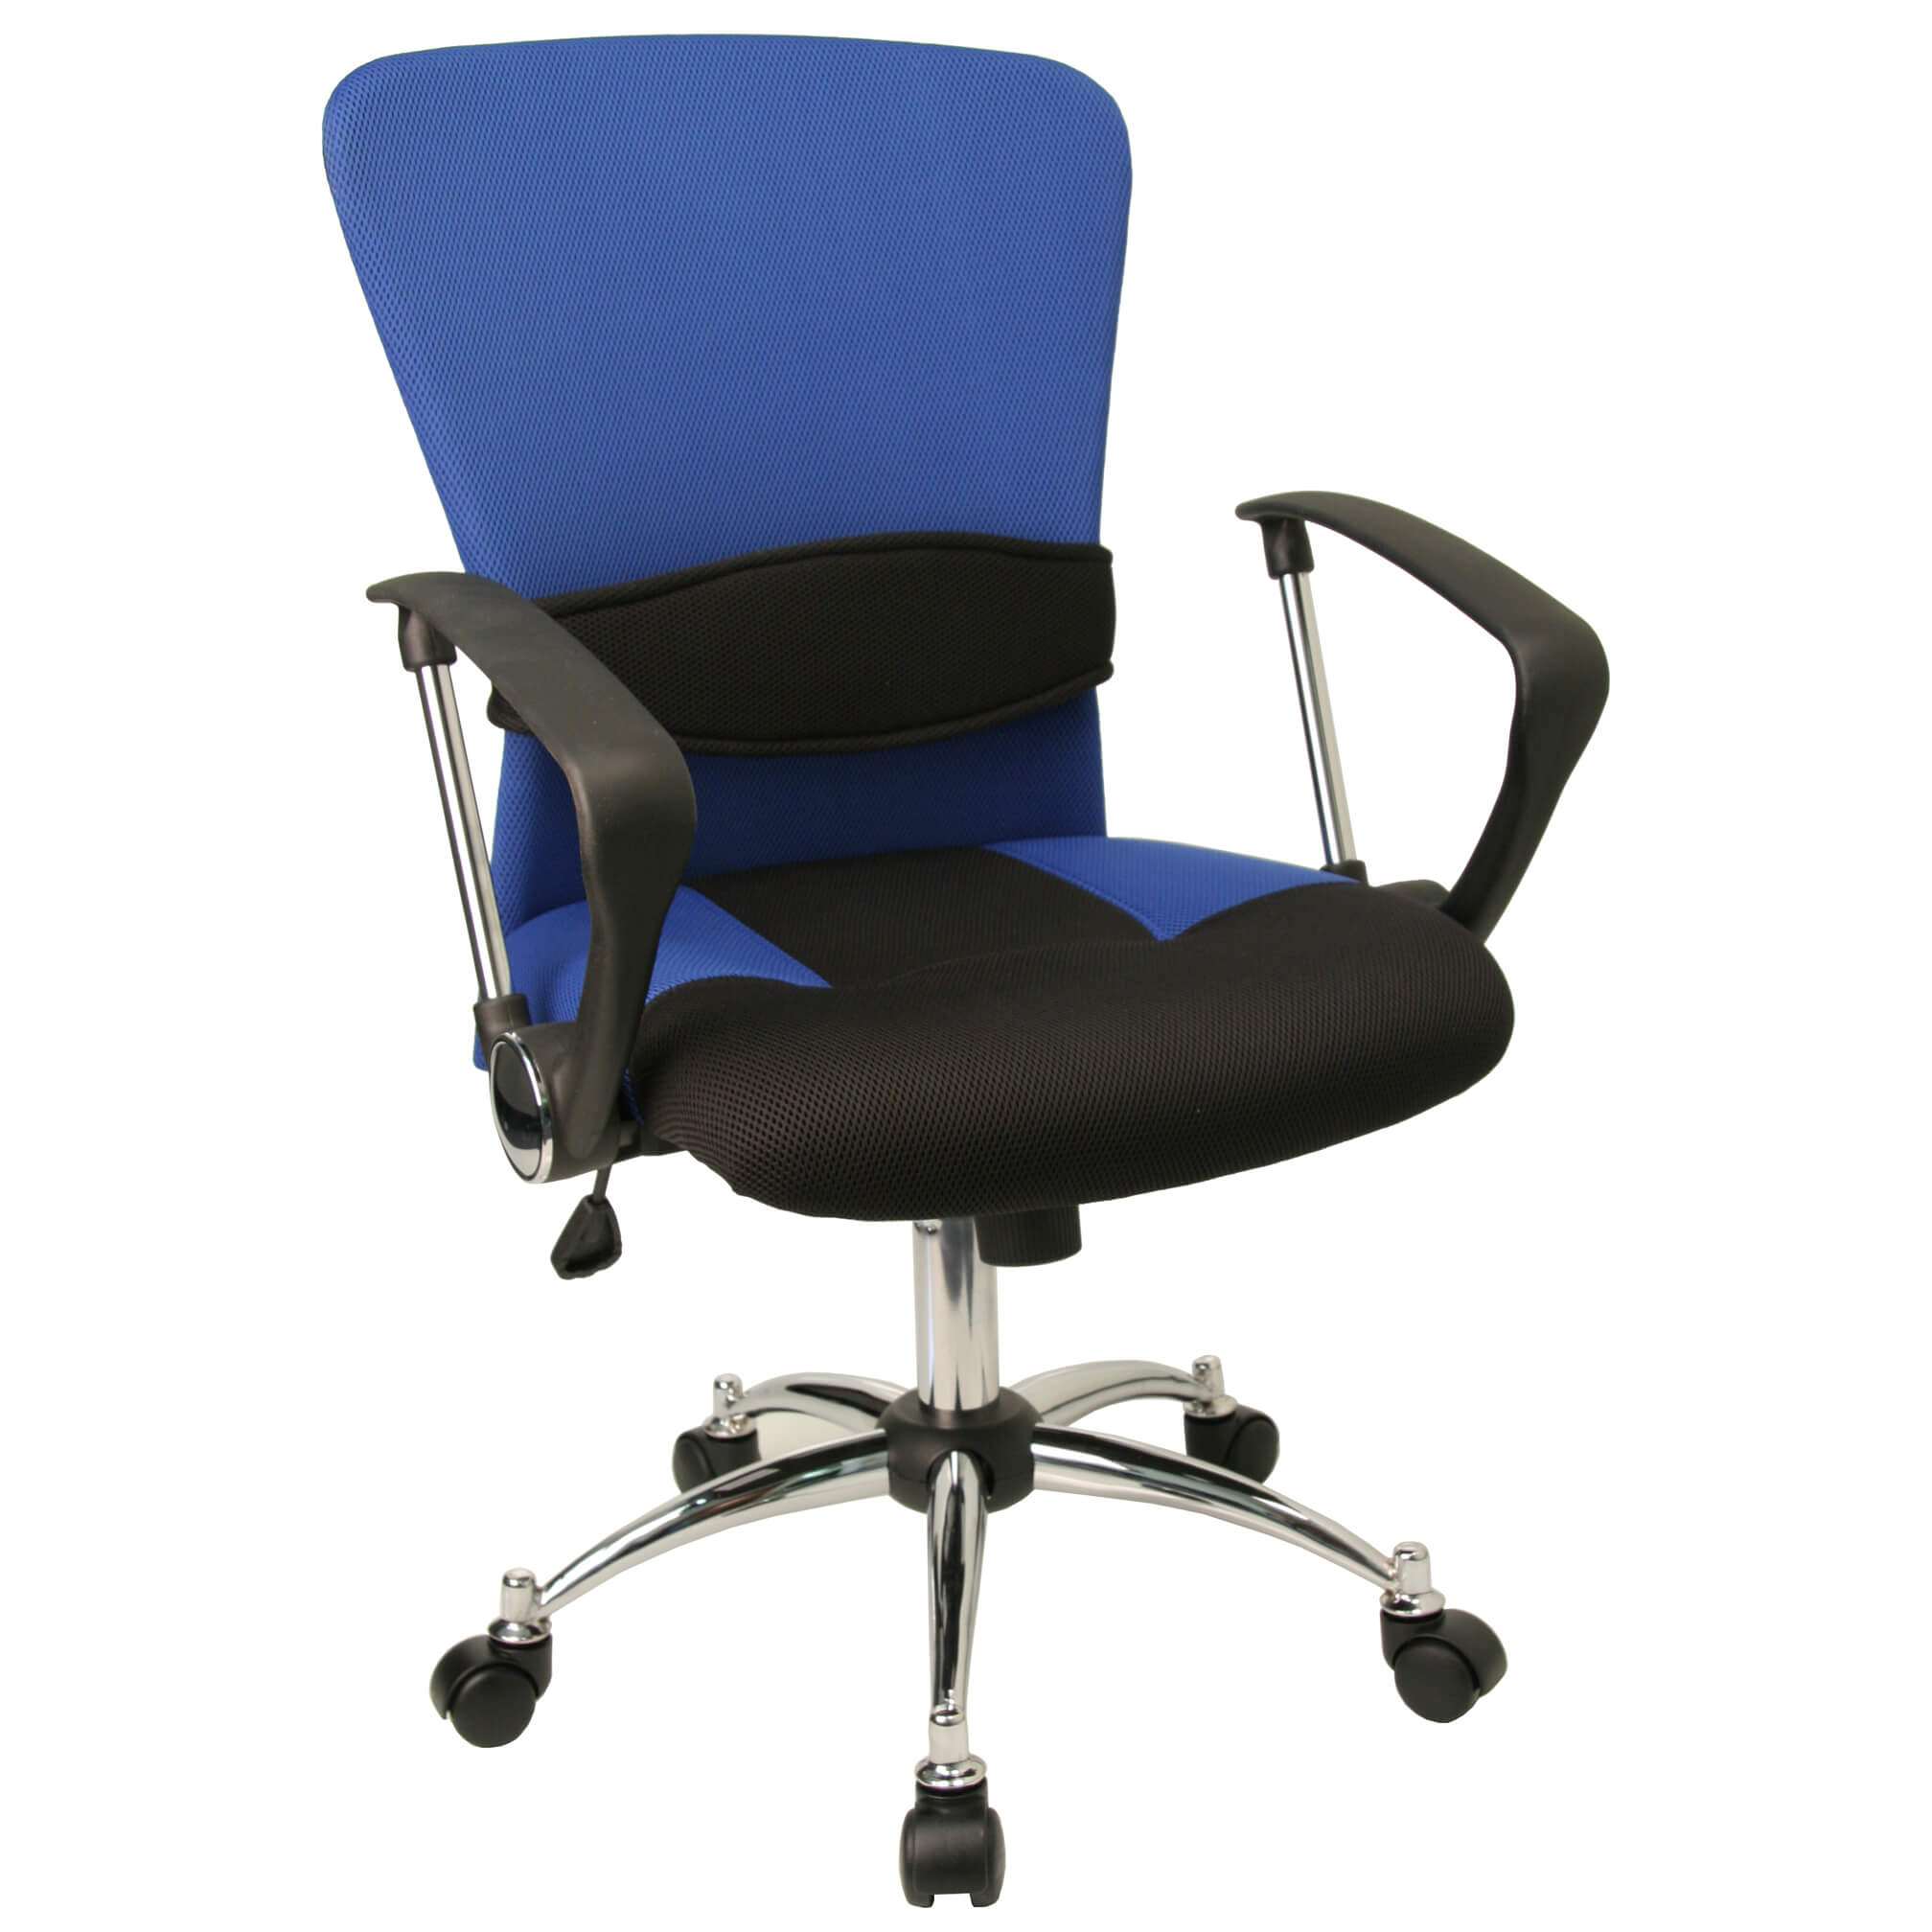 https://www.cubicles.com/shop/images/cool-office-chairs-lumbar-support-office-chair.jpg